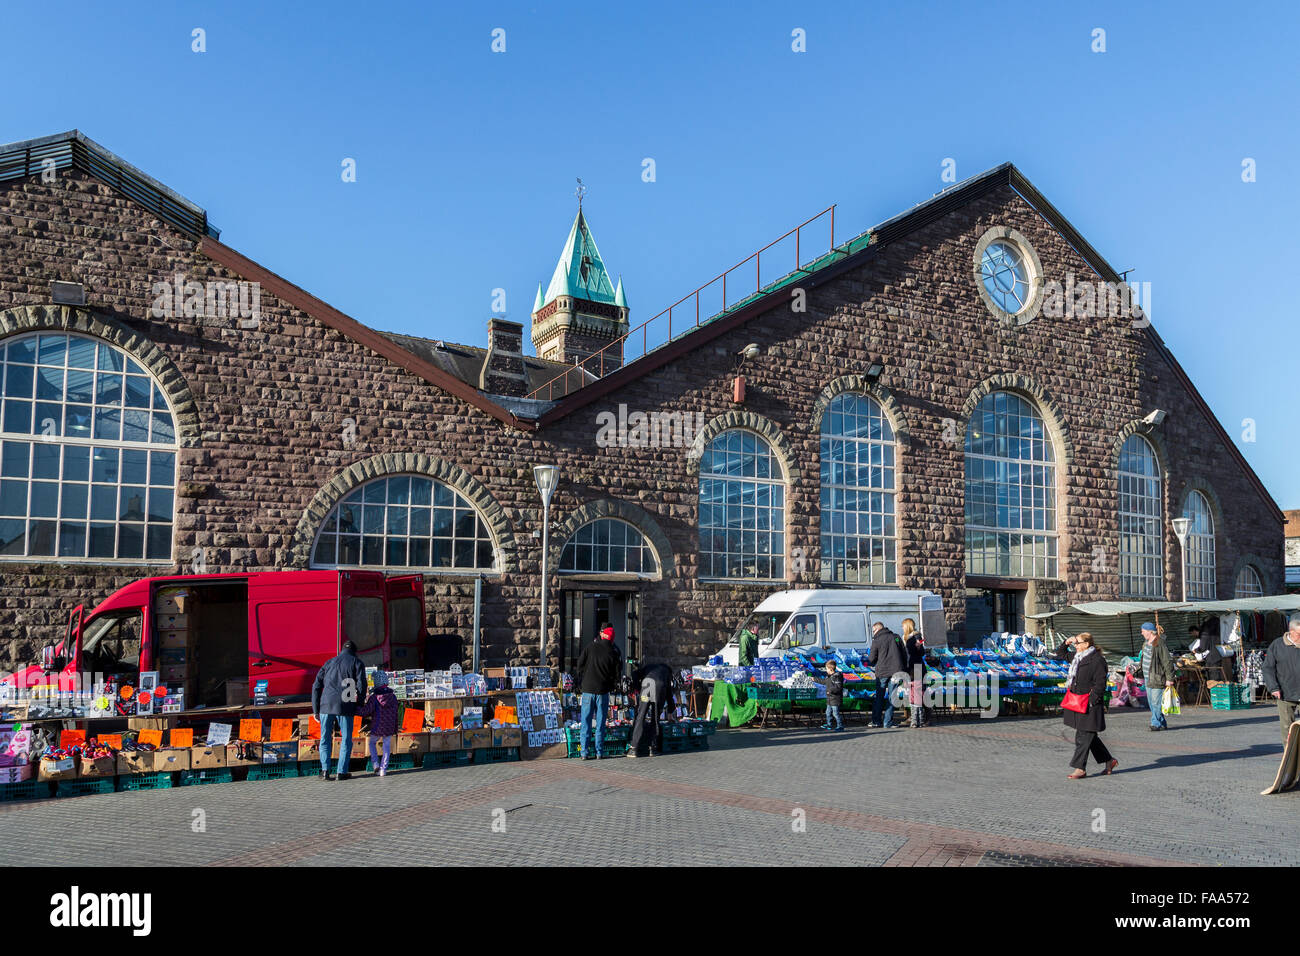 Traders selling from vans outside the market hall on market day, Abergavenny, Wales, UK Stock Photo